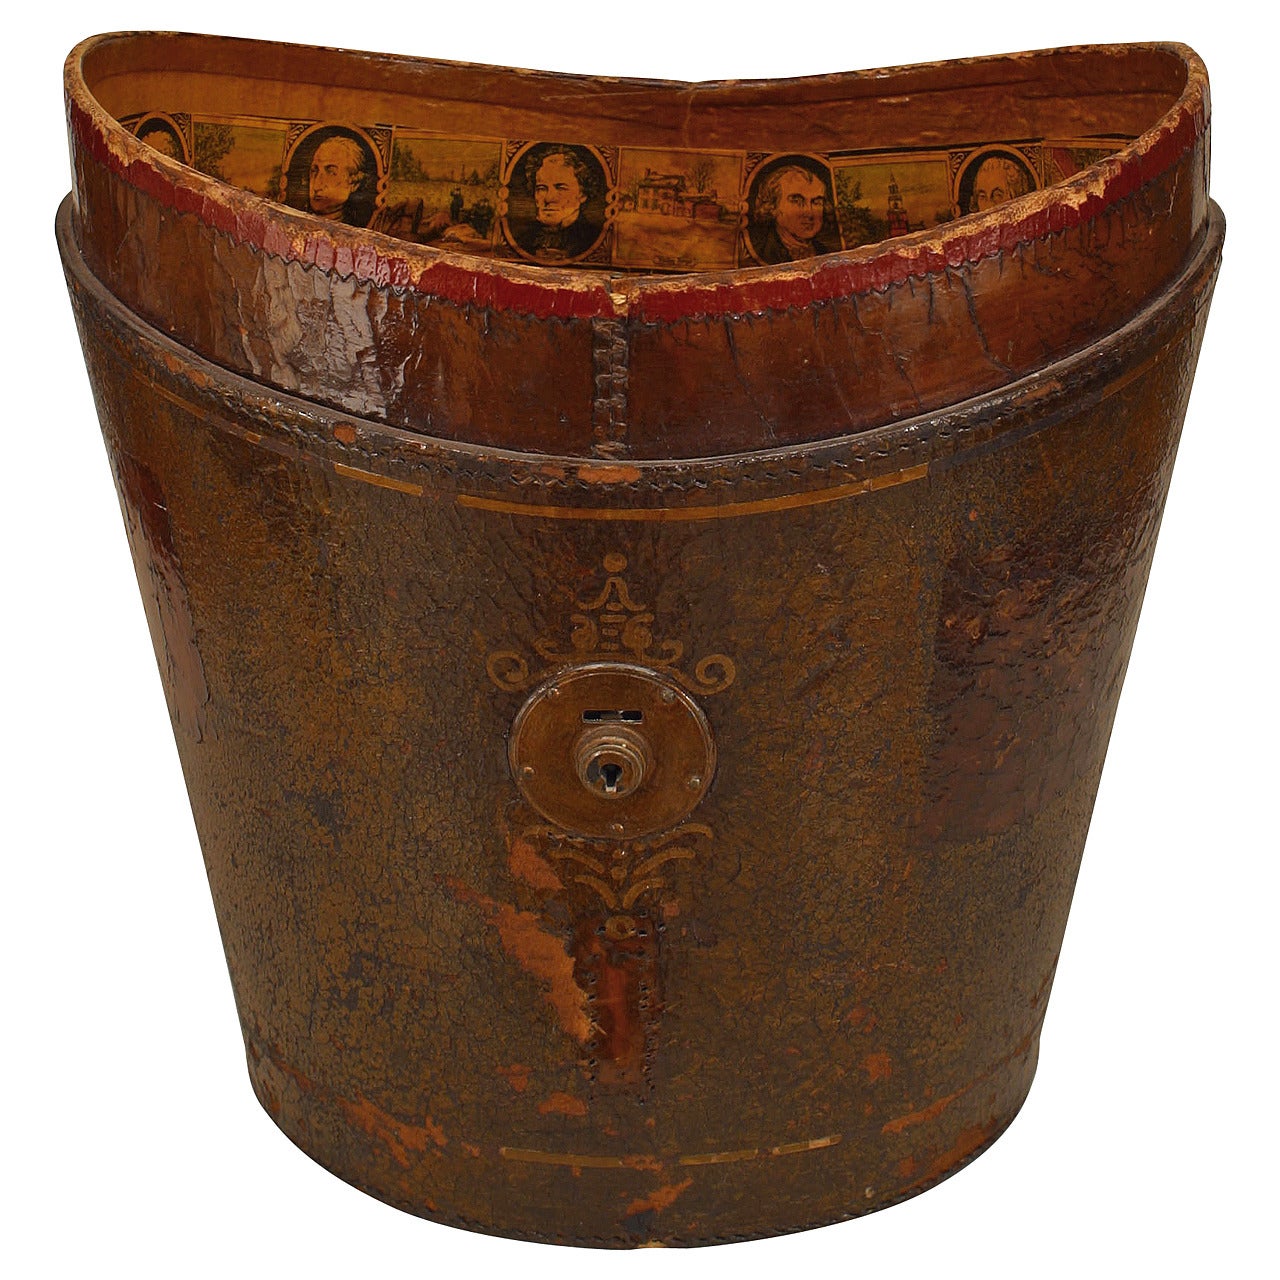 19th Century American Red Leather Top Hat Box with Decoupage Memorabilia